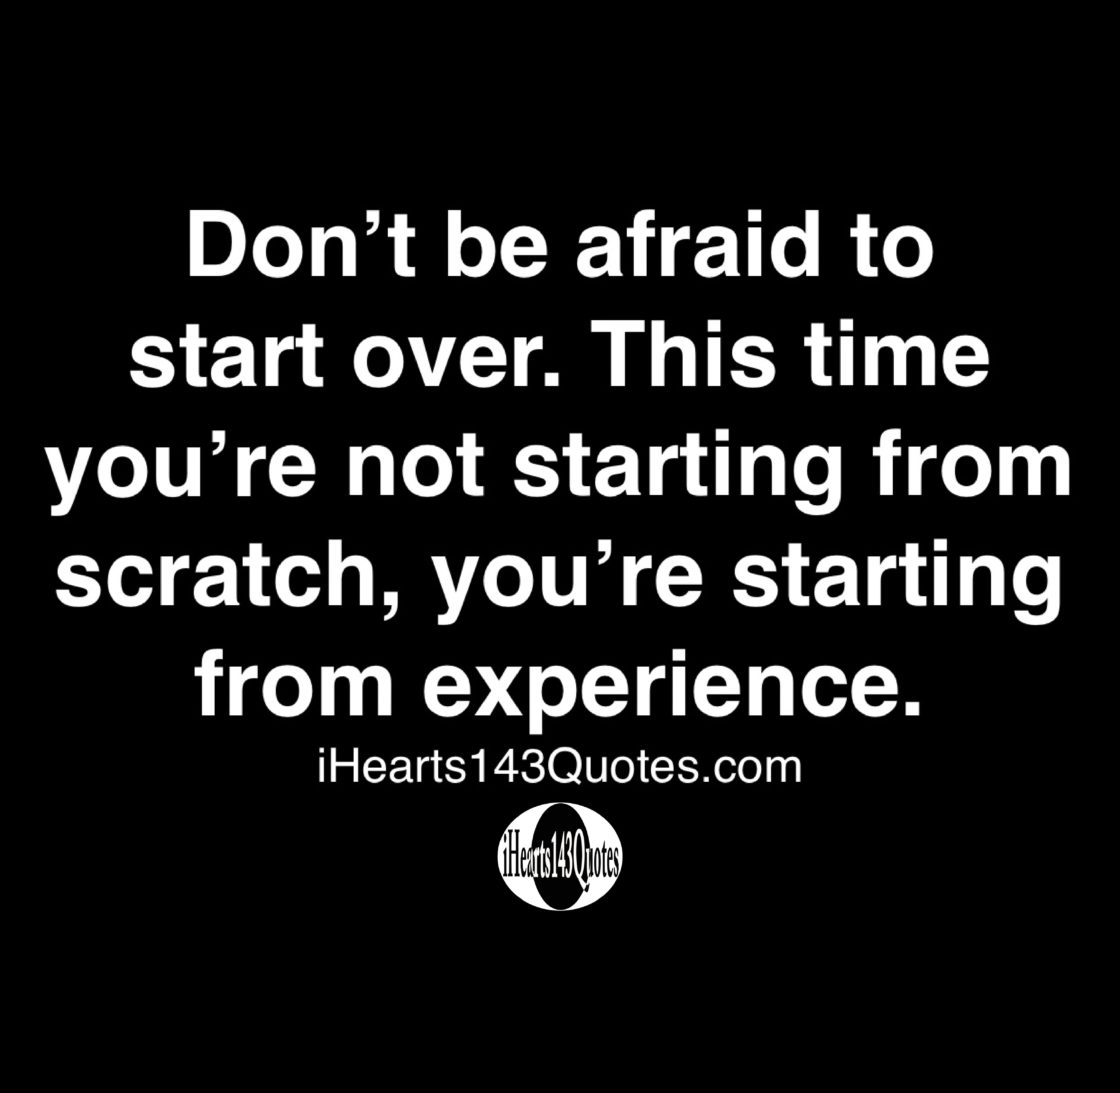 Don’t be afraid to start over. This time you’re not starting from